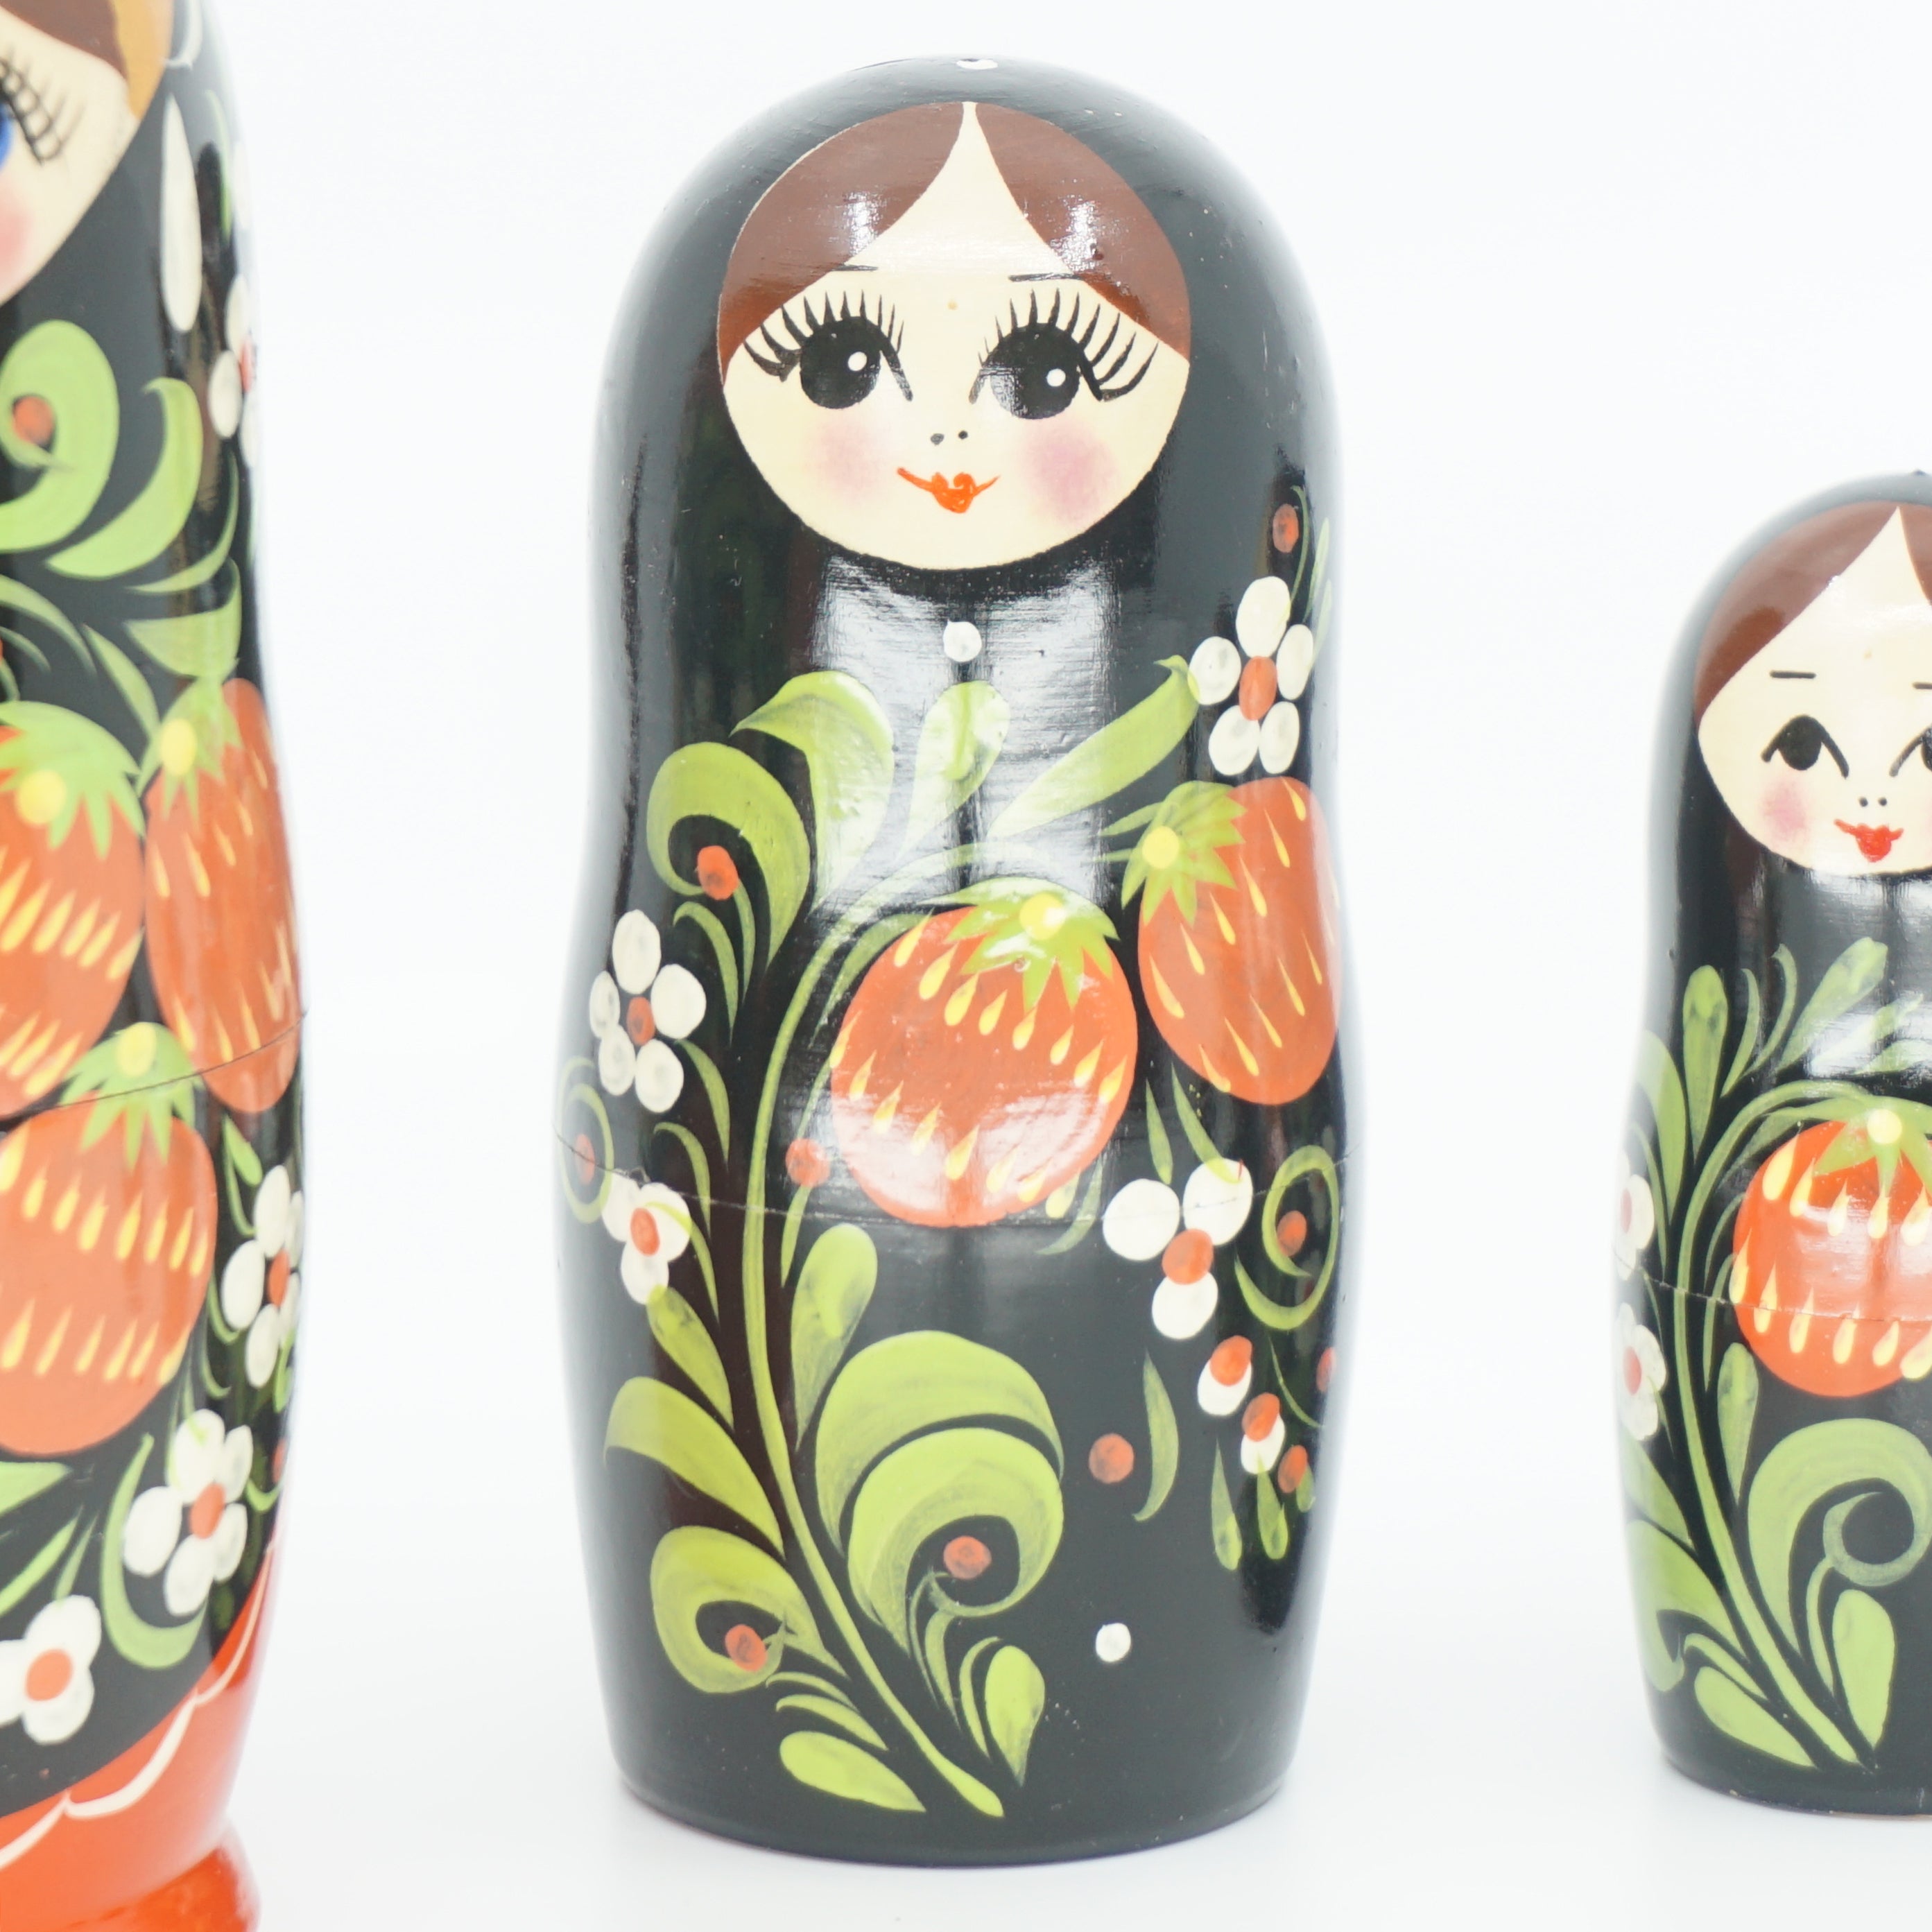 Wooden Russian Dolls "Матрёшки" from Russia